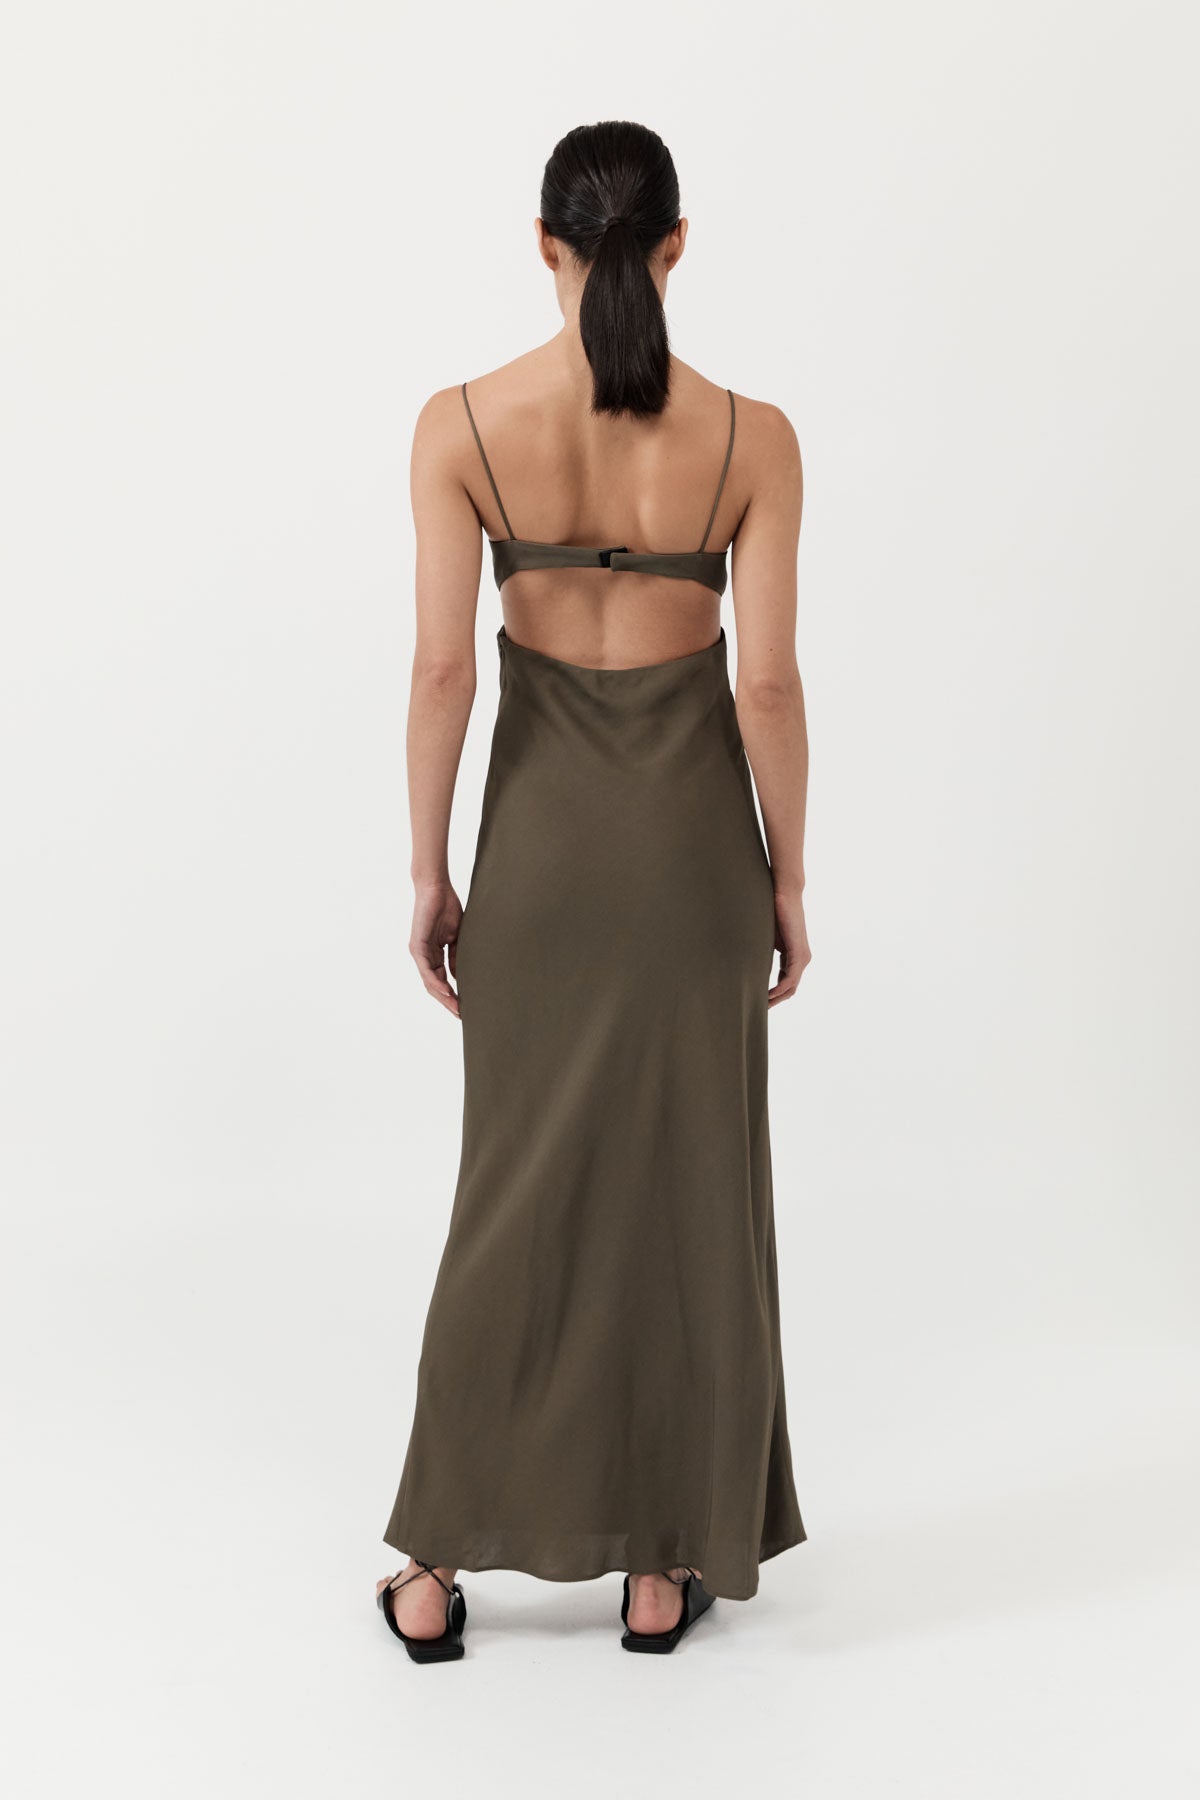 The St Agni Resort Dress in Olivine available at The New Trend Australia